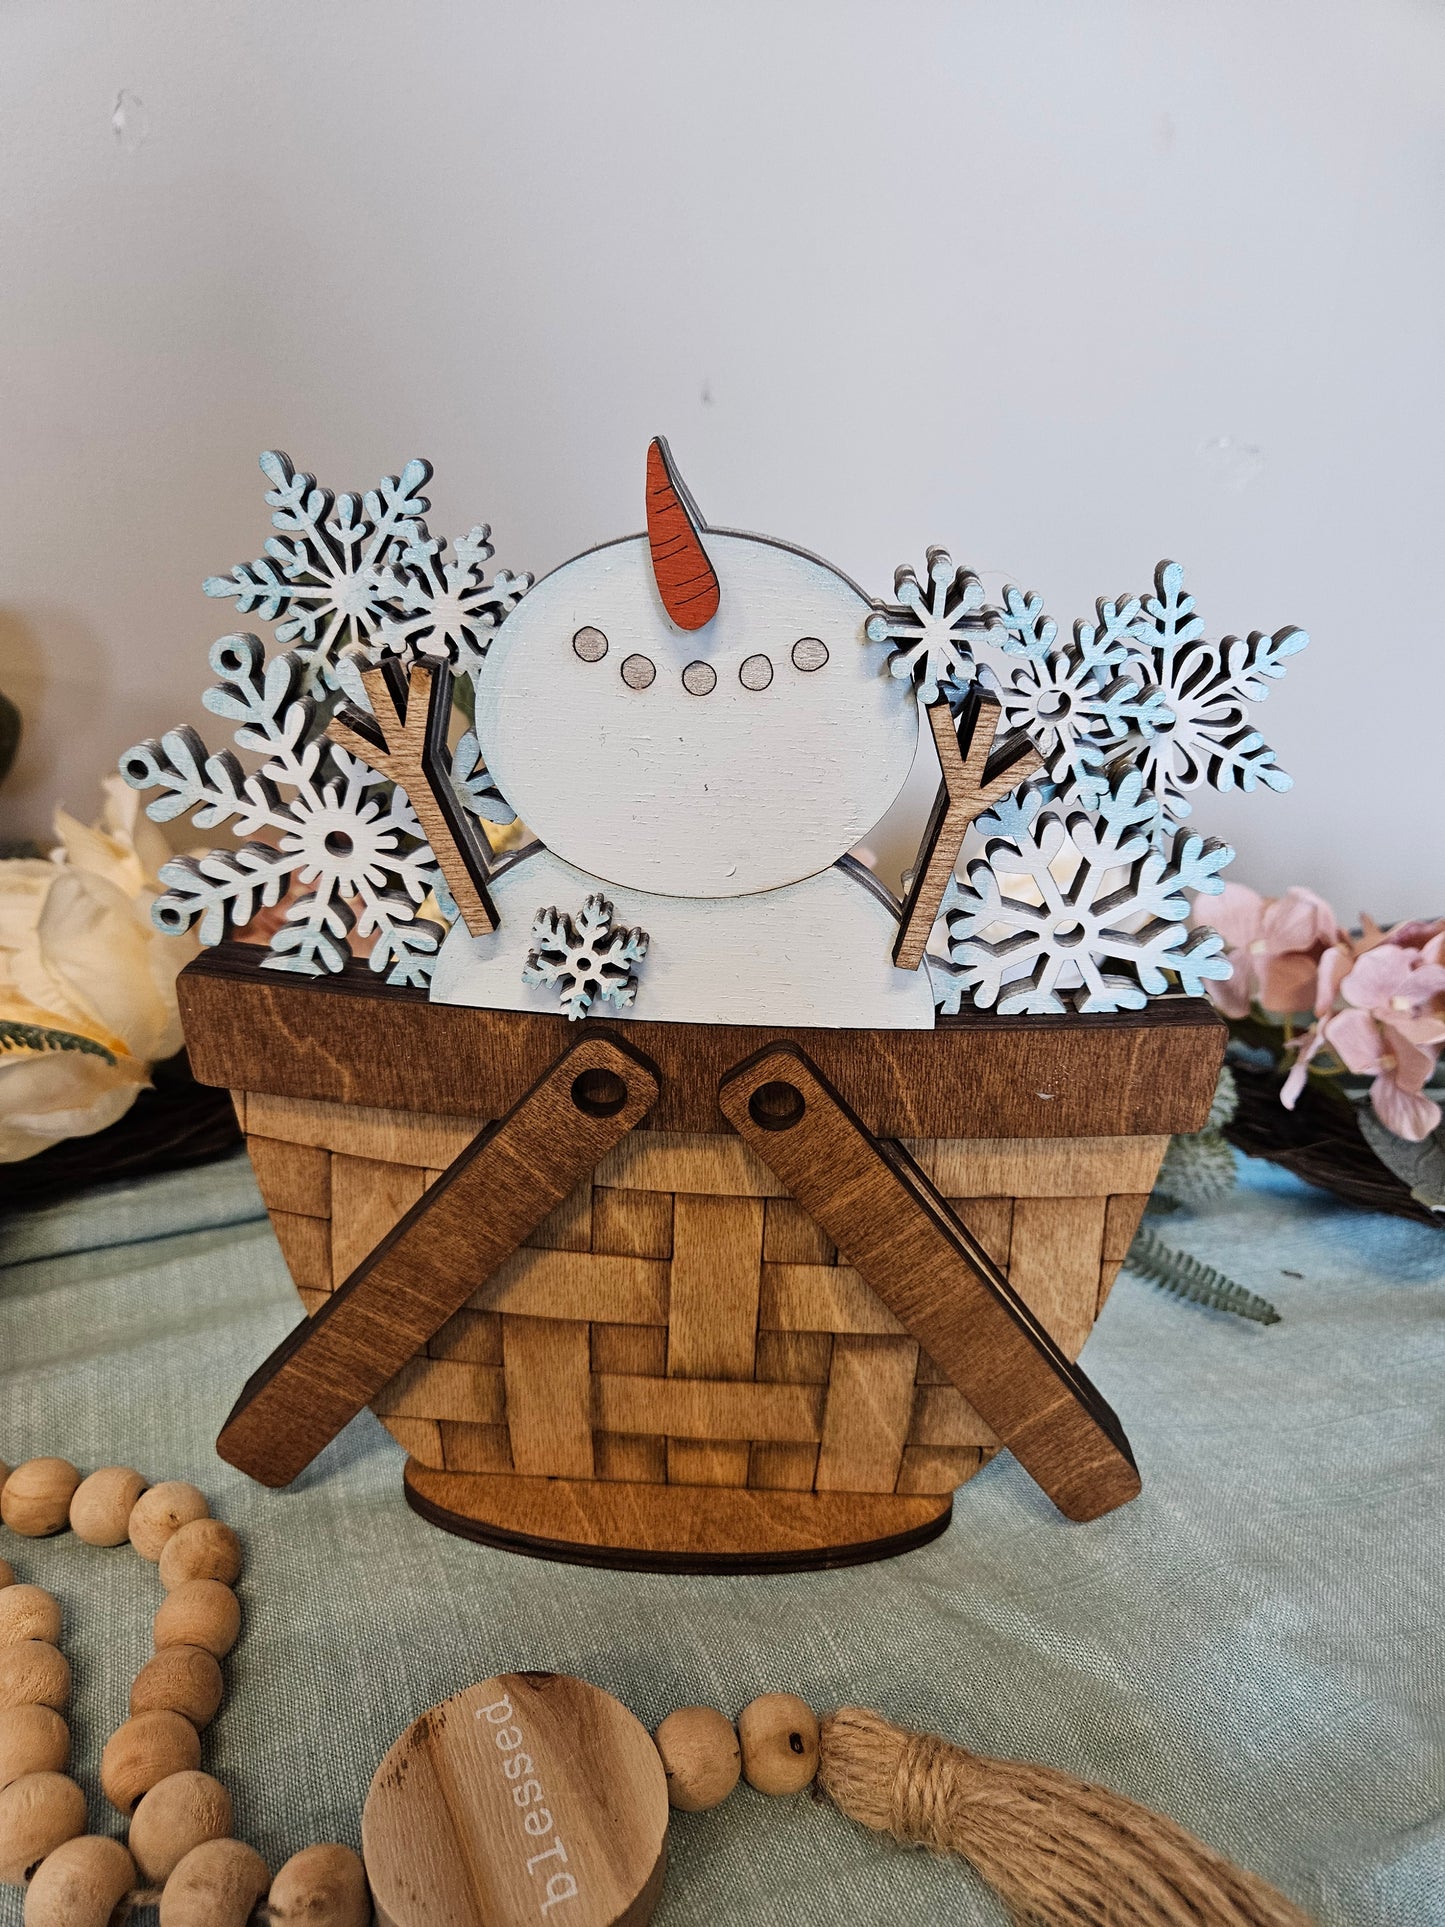 Snowman with snowflakes basket insert